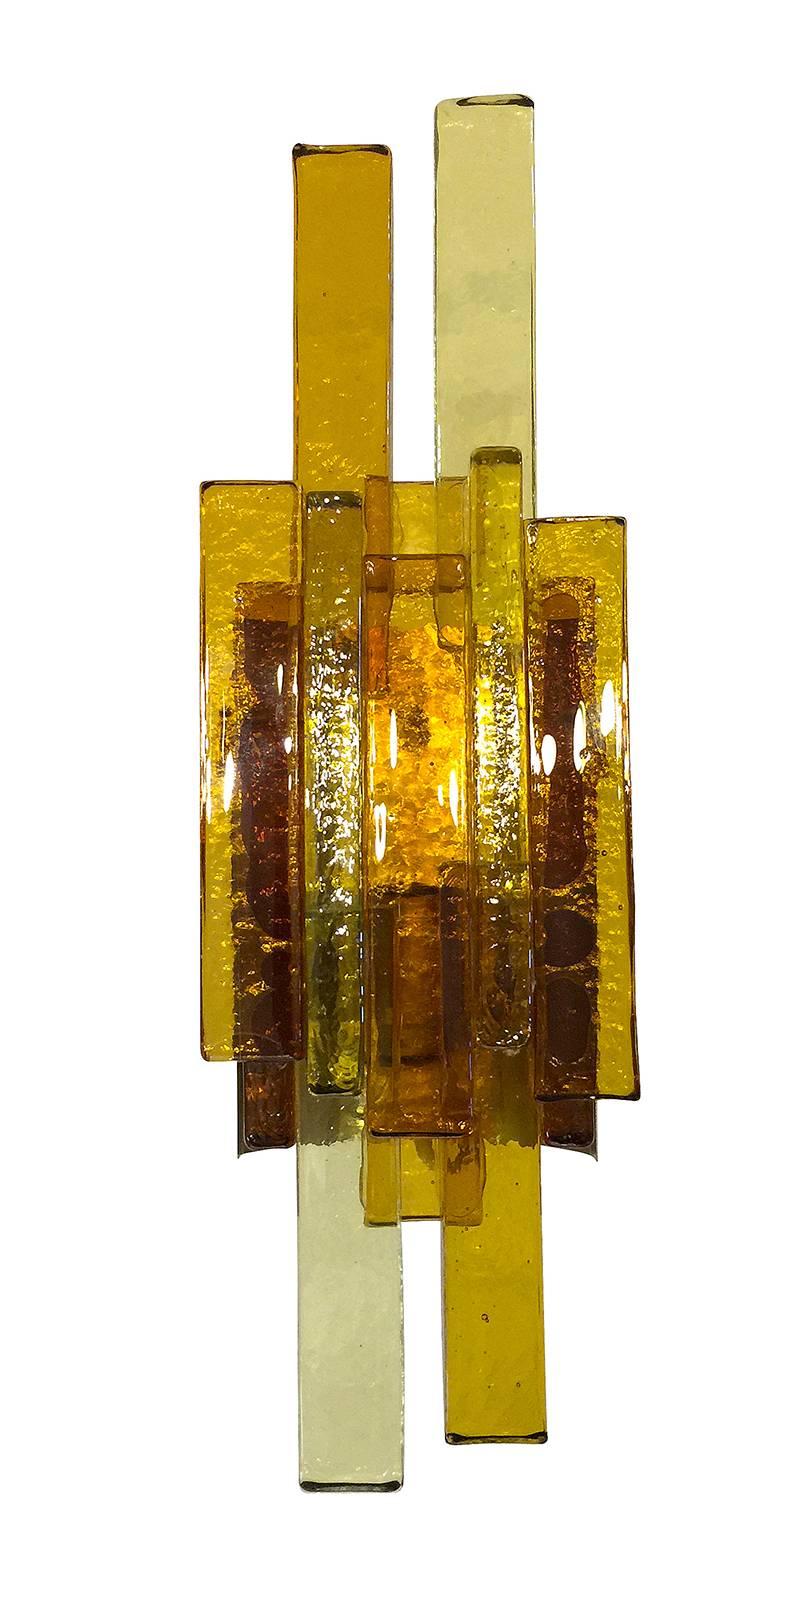 Pair of glass wall sconces by Svend Aage Holm Sorensen.    Store formerly known as ARTFUL DODGER INC